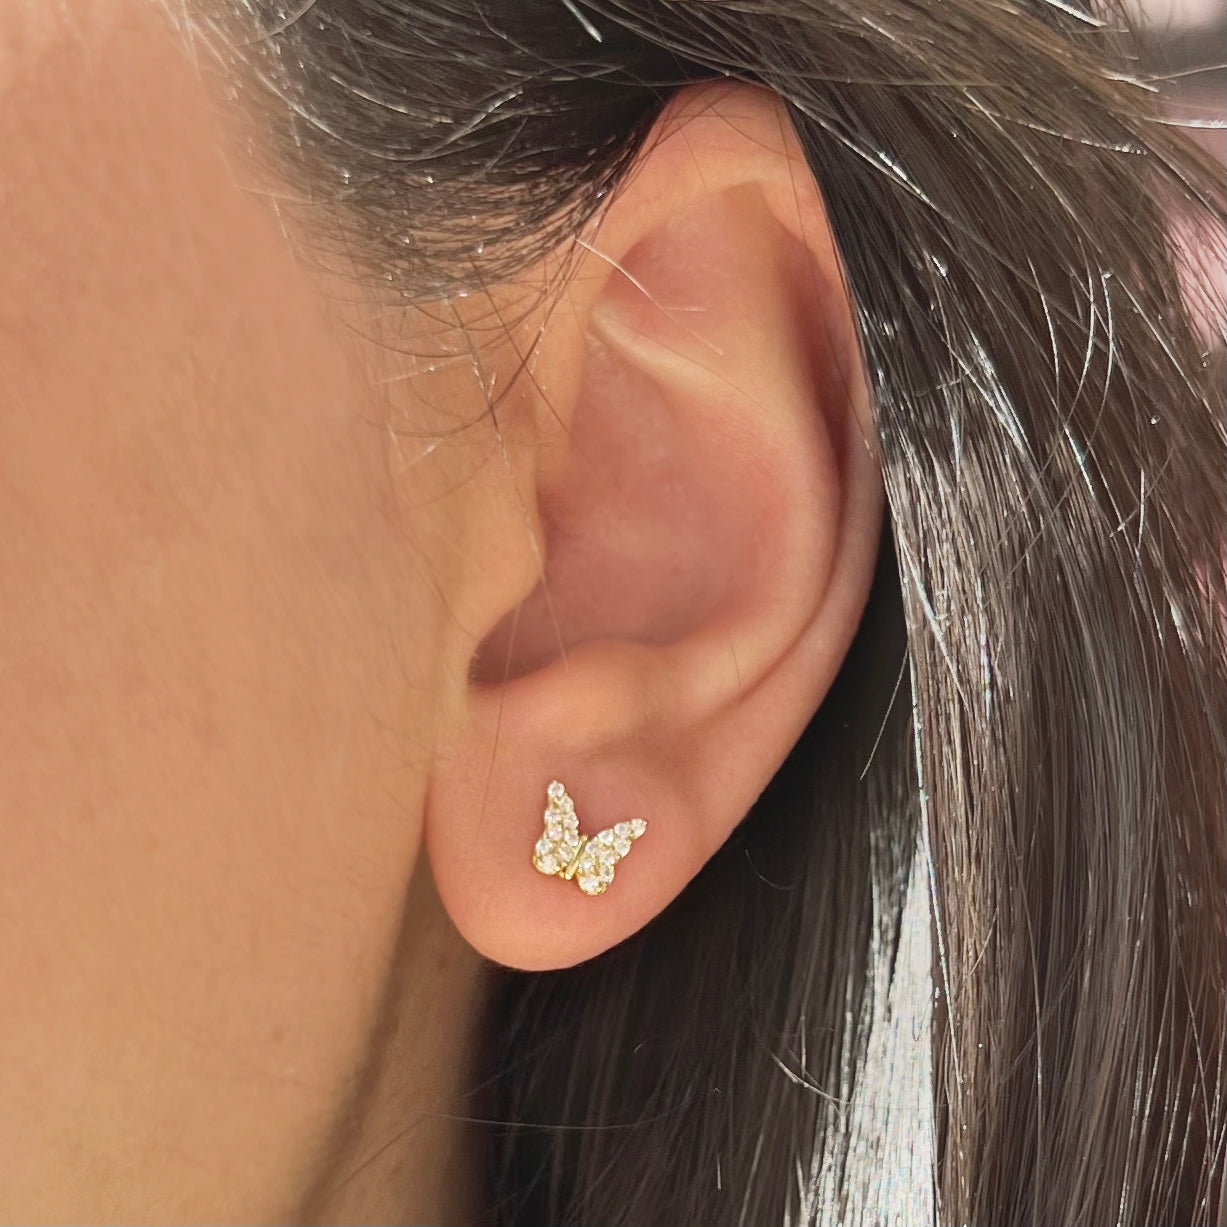 Butterfly Stud Earrings with Crystals